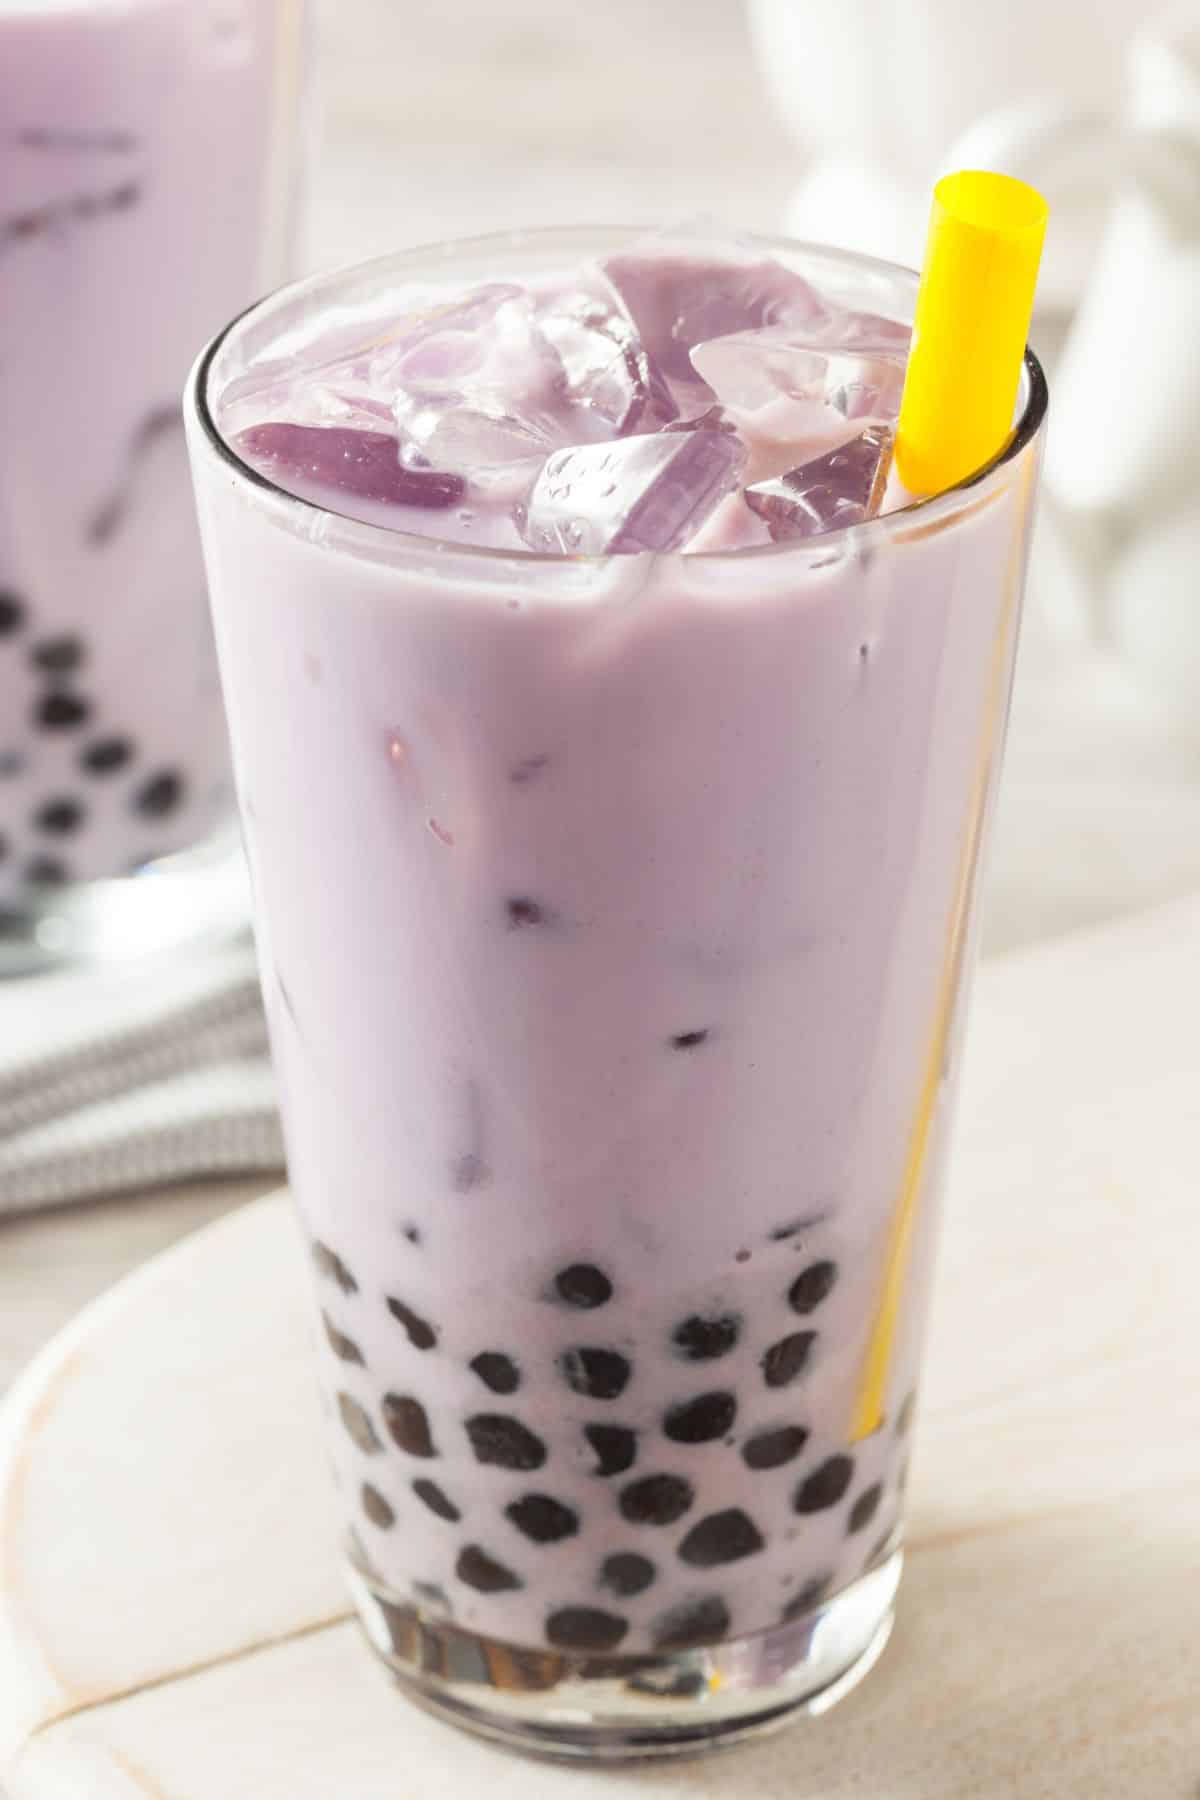 Taro milk tea in a glass with boba pearls and a straw.